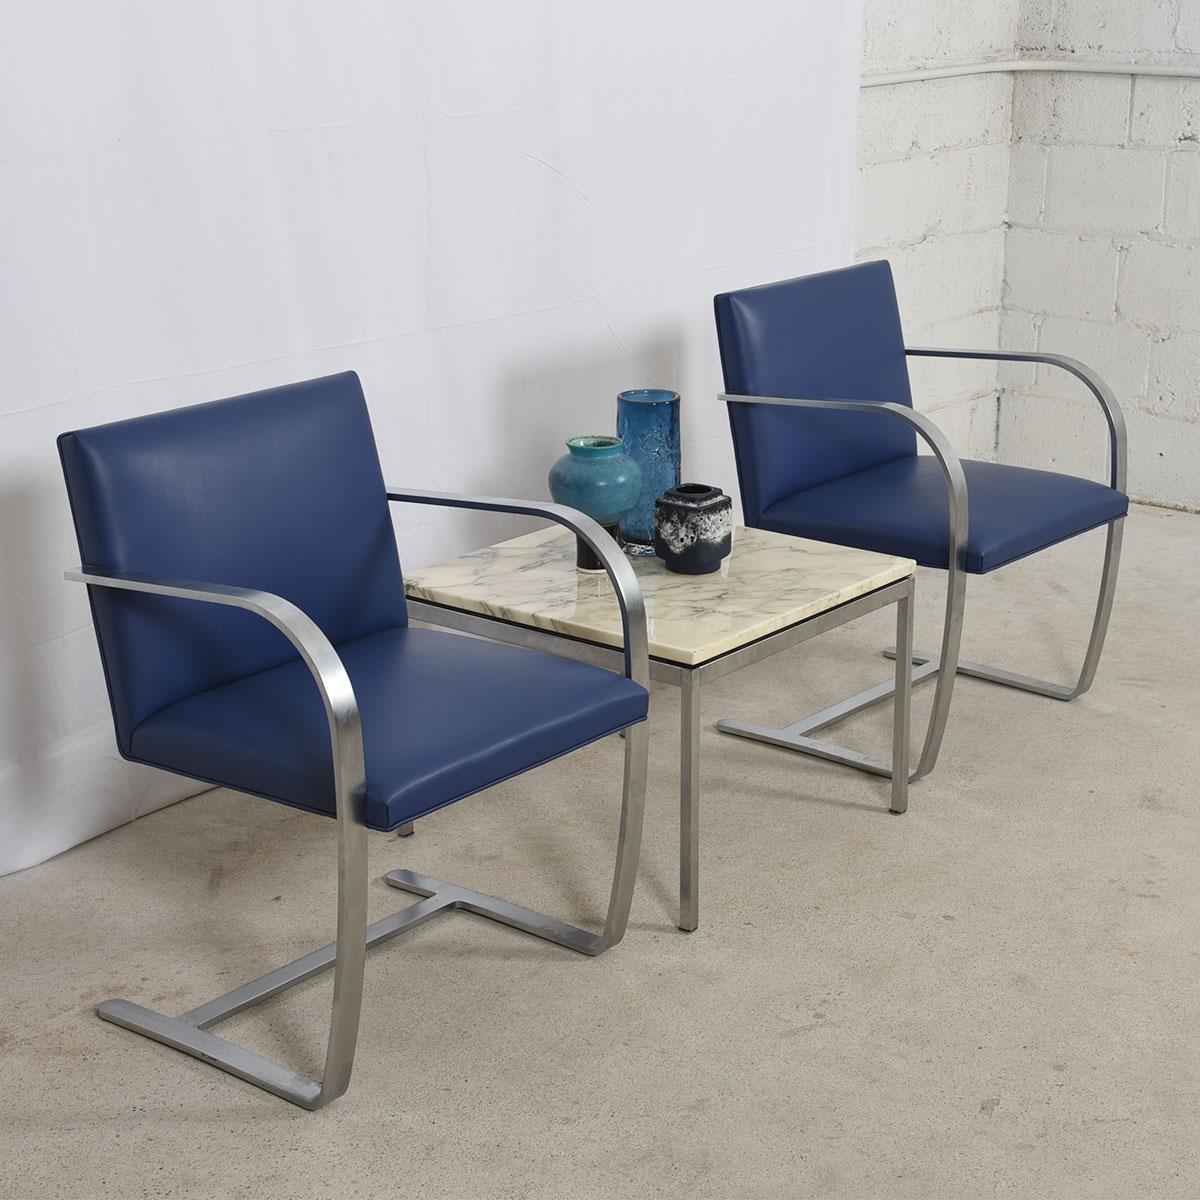 Pair of Stainless Steel Flat Bar Brno Chairs with Cadet Blue Leather Upholstery For Sale 2